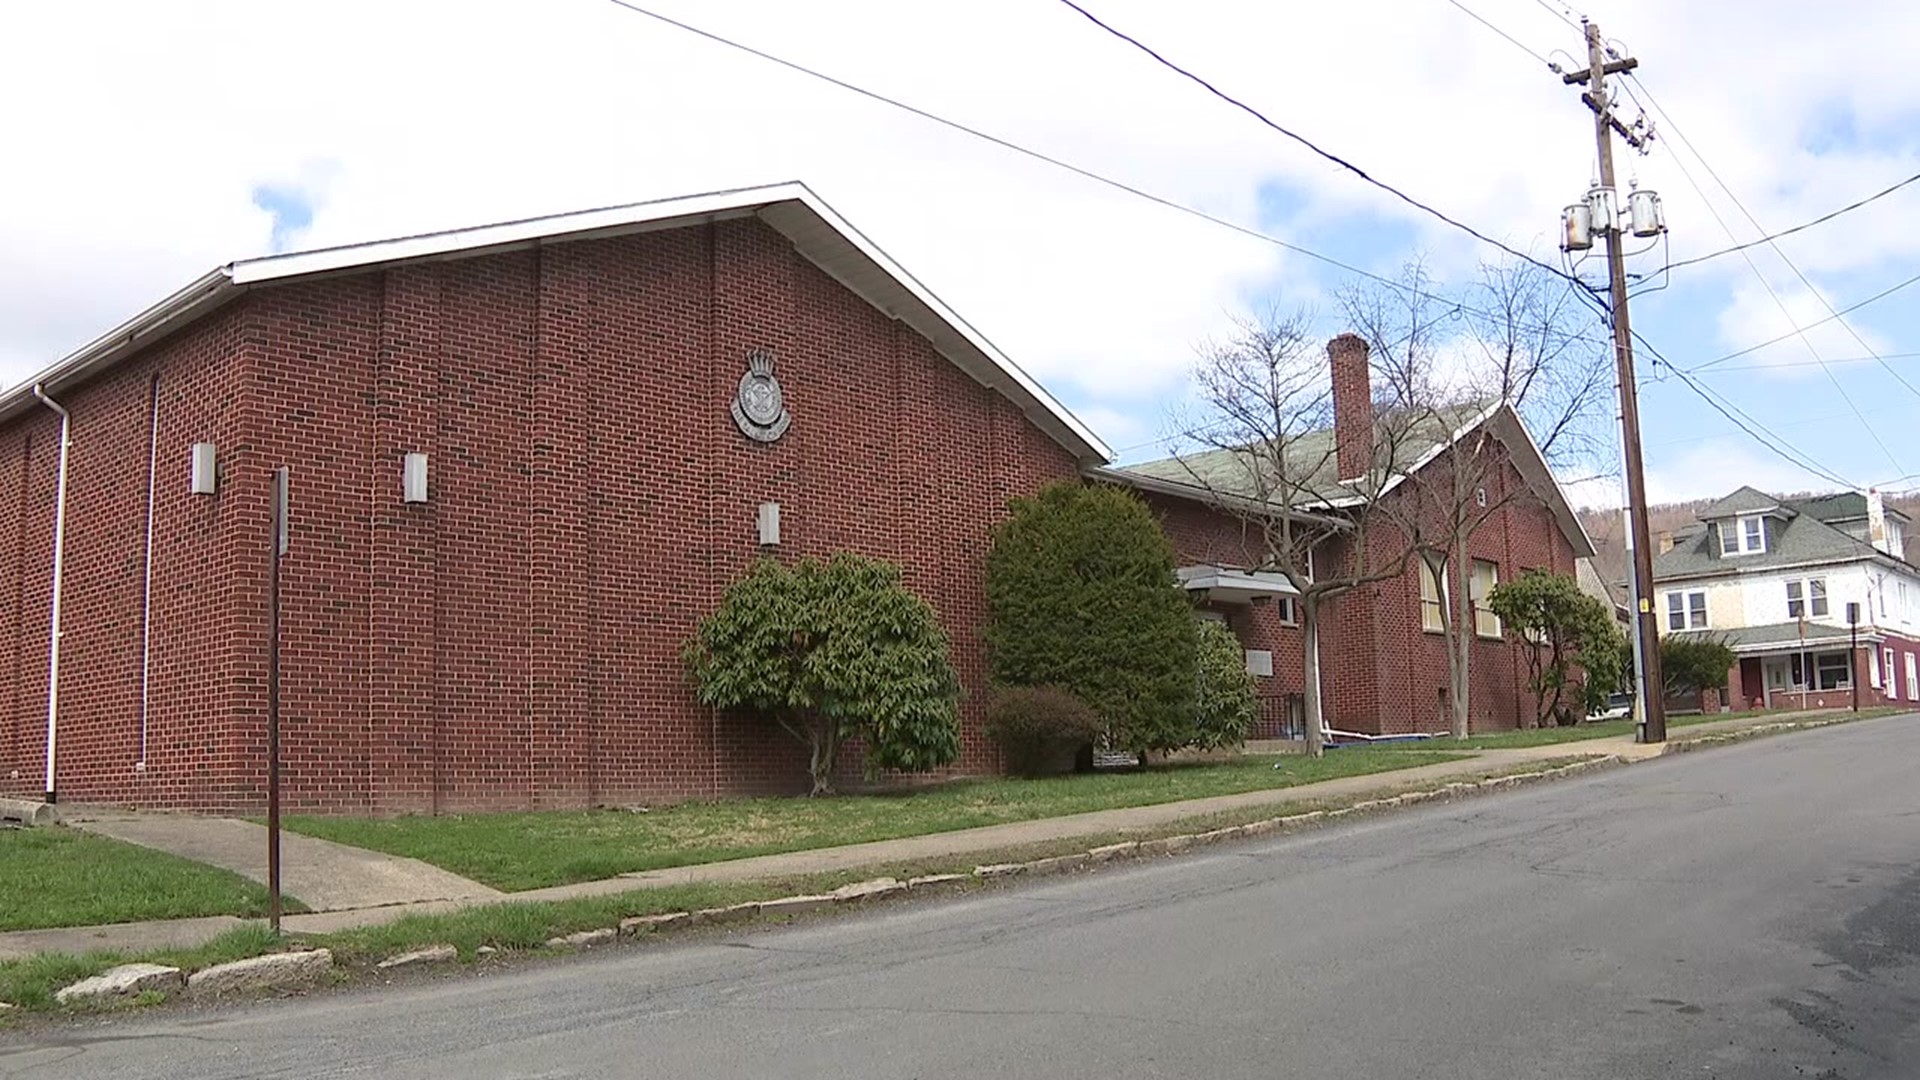 After 45 years in Coal Township, the Salvation Army of Shamokin is moving. The nonprofit will merge some of its services with its Sunbury location.